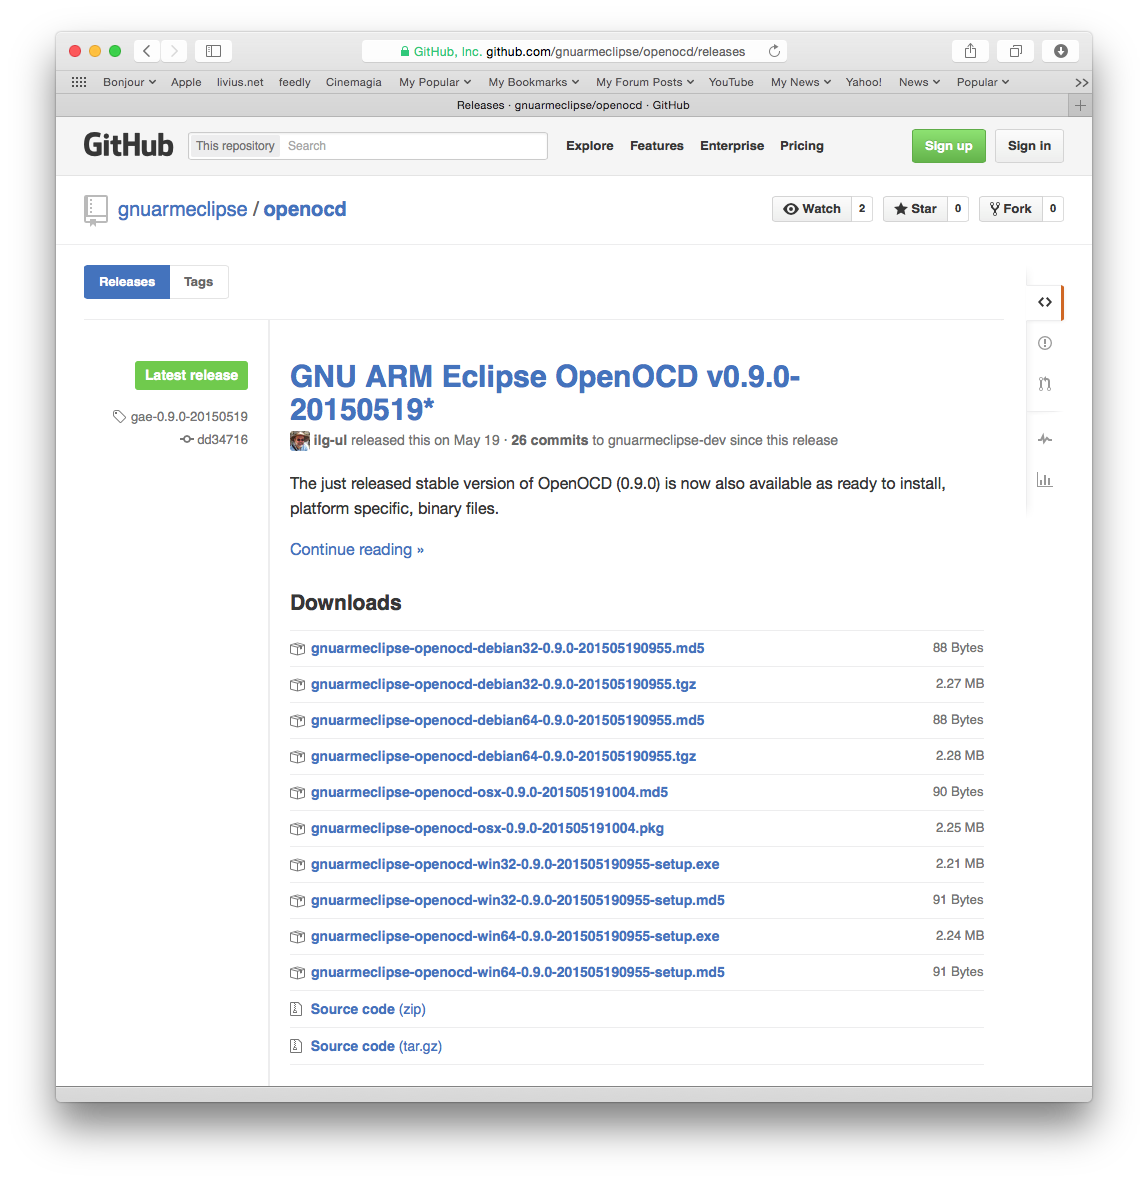 The OpenOCD Releases page